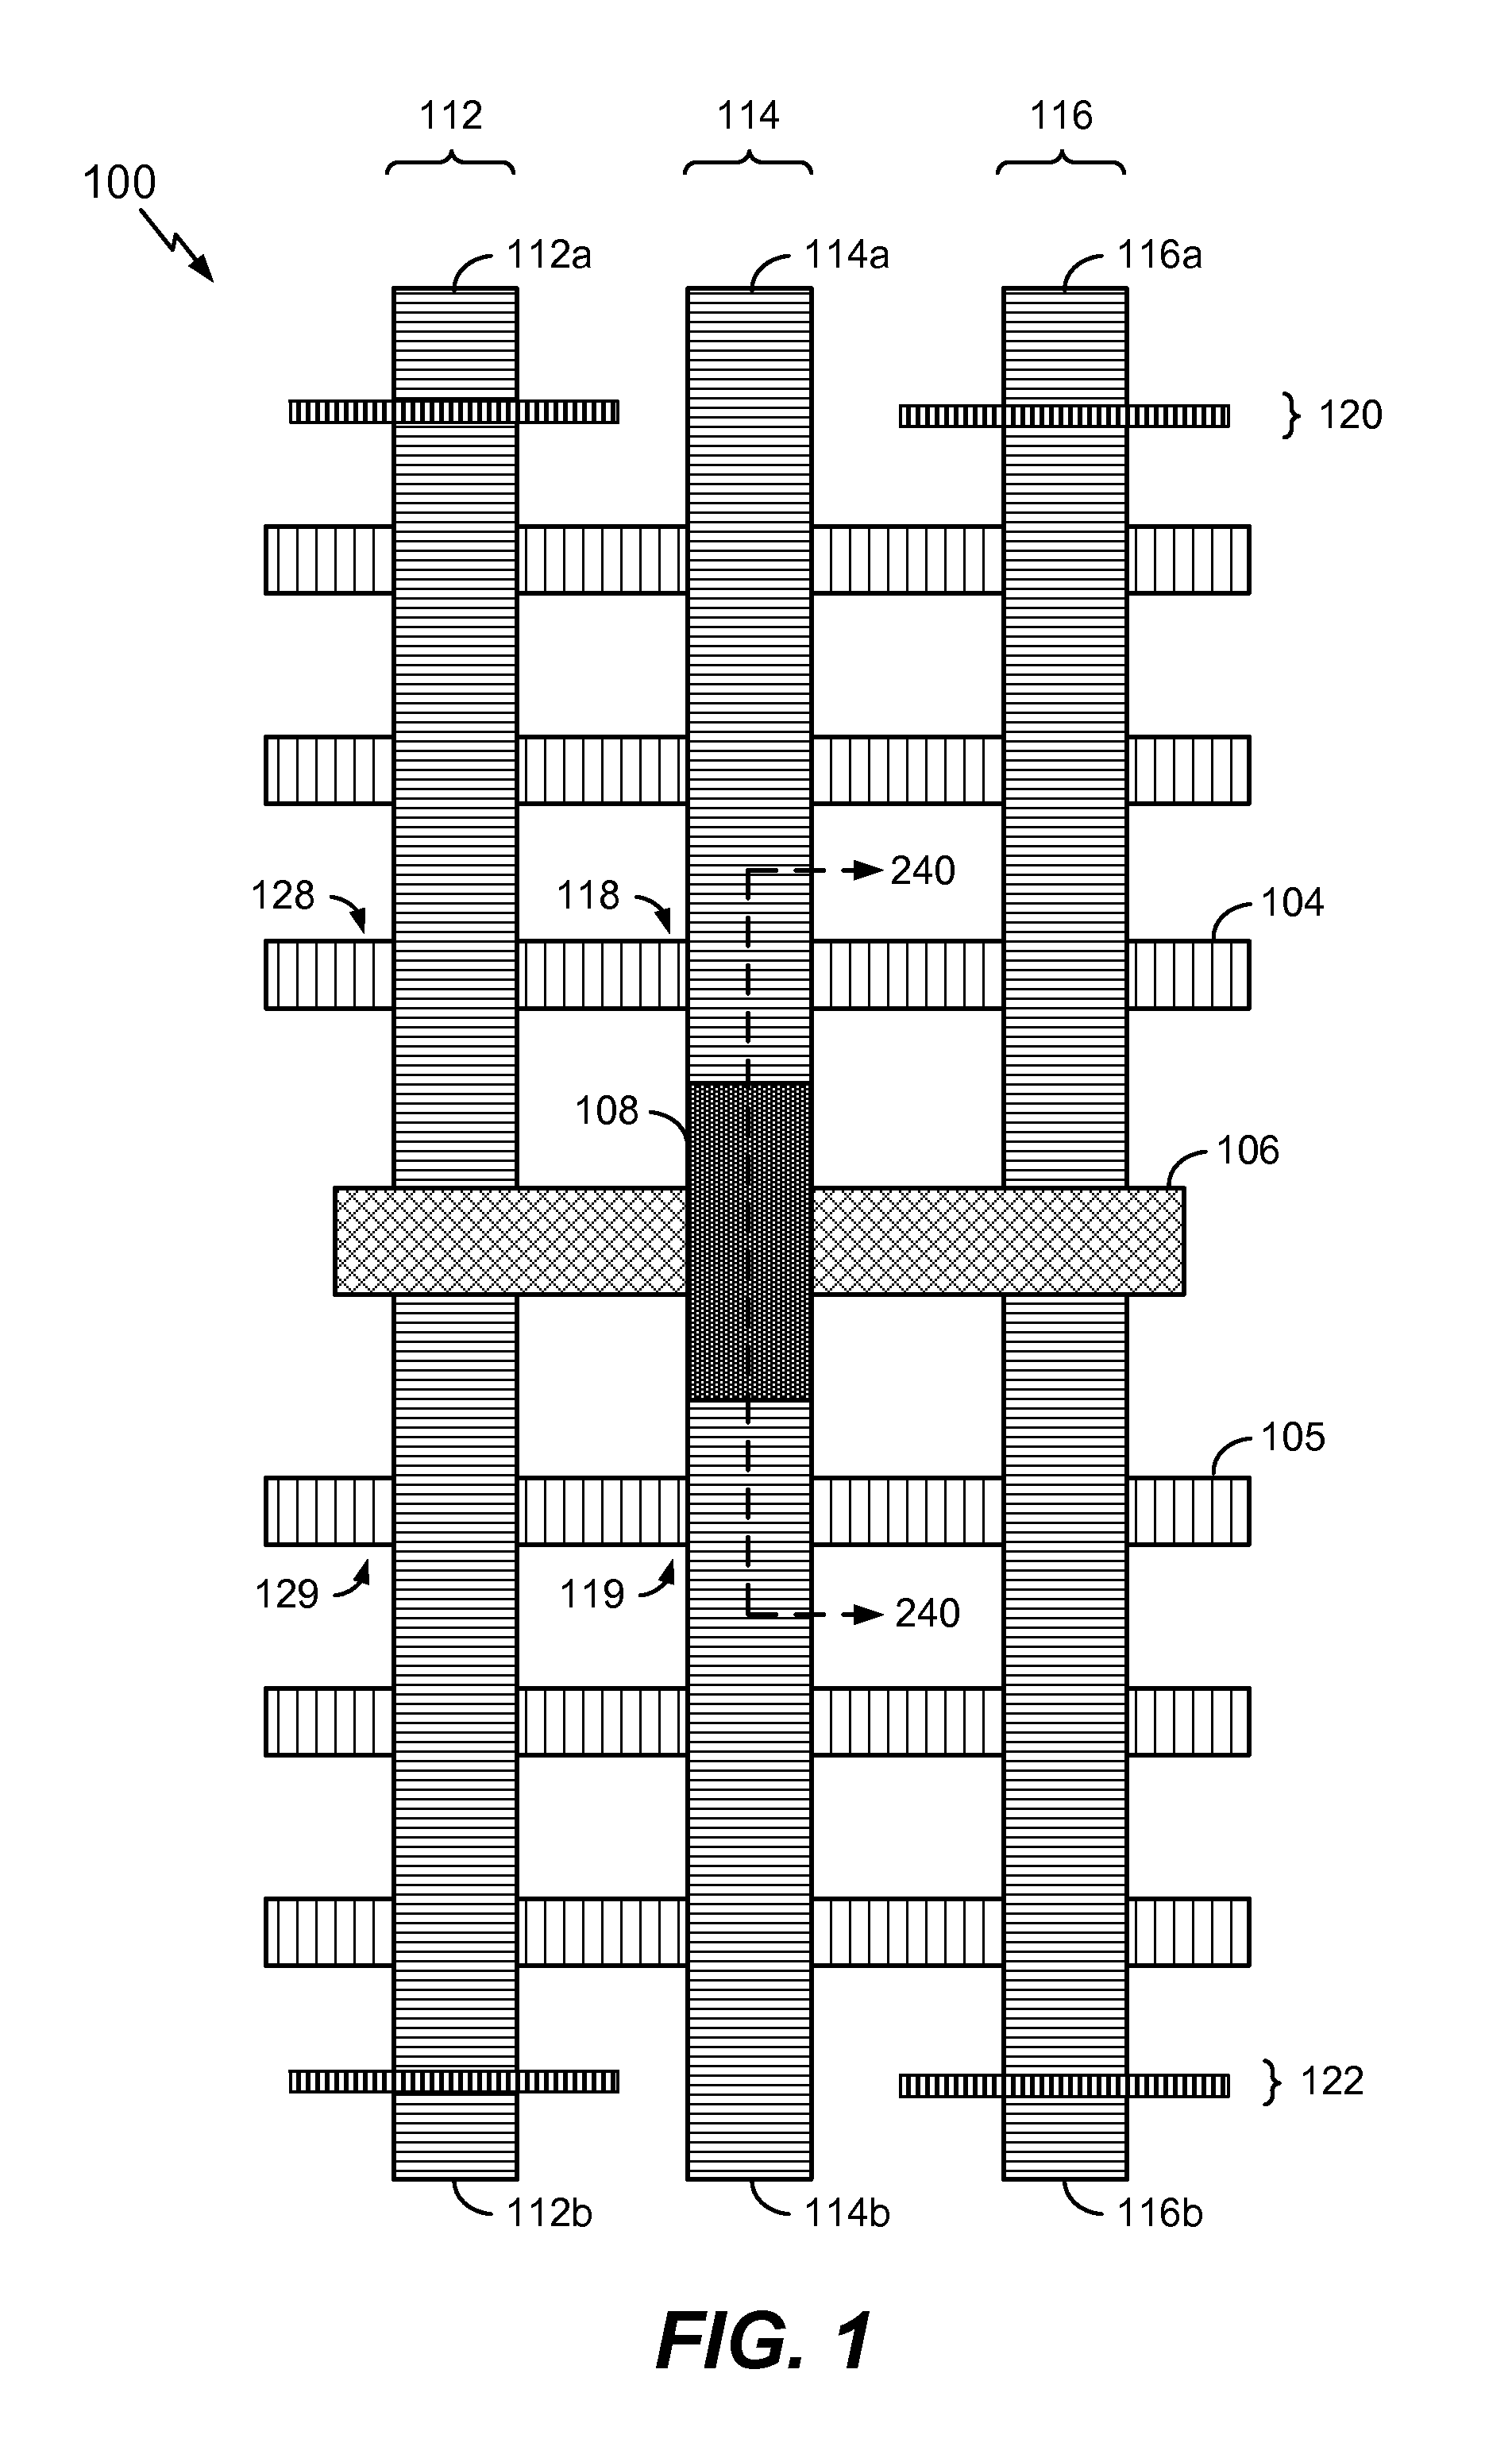 Device and method to connect gate regions separated using a gate cut